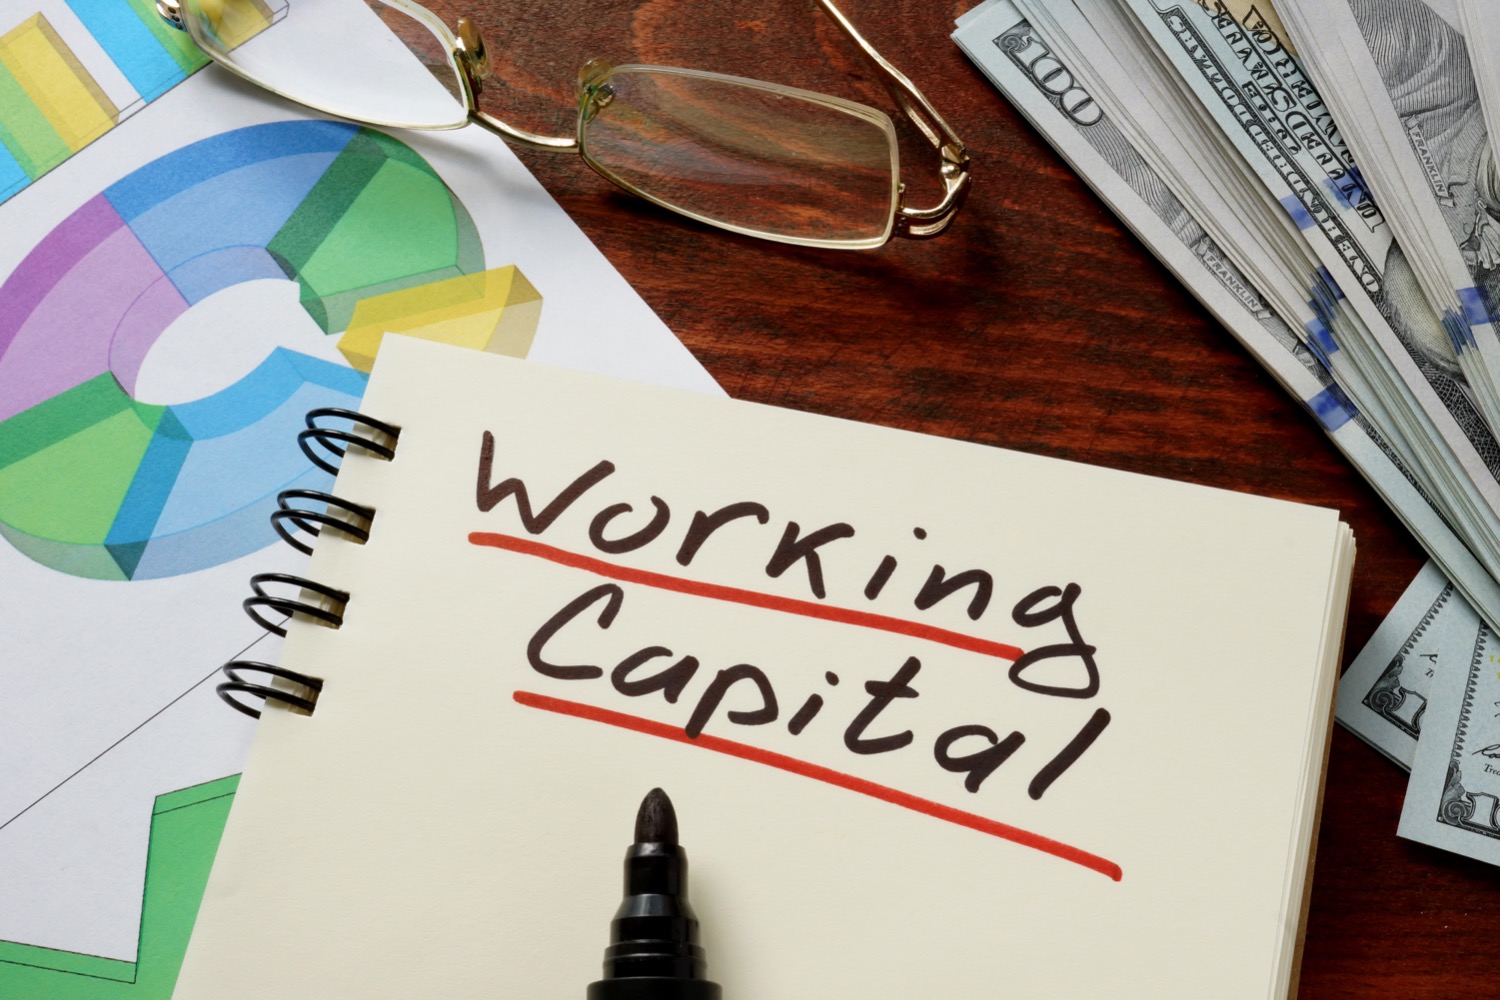 A photo of a notebook with a written words "Working capital".